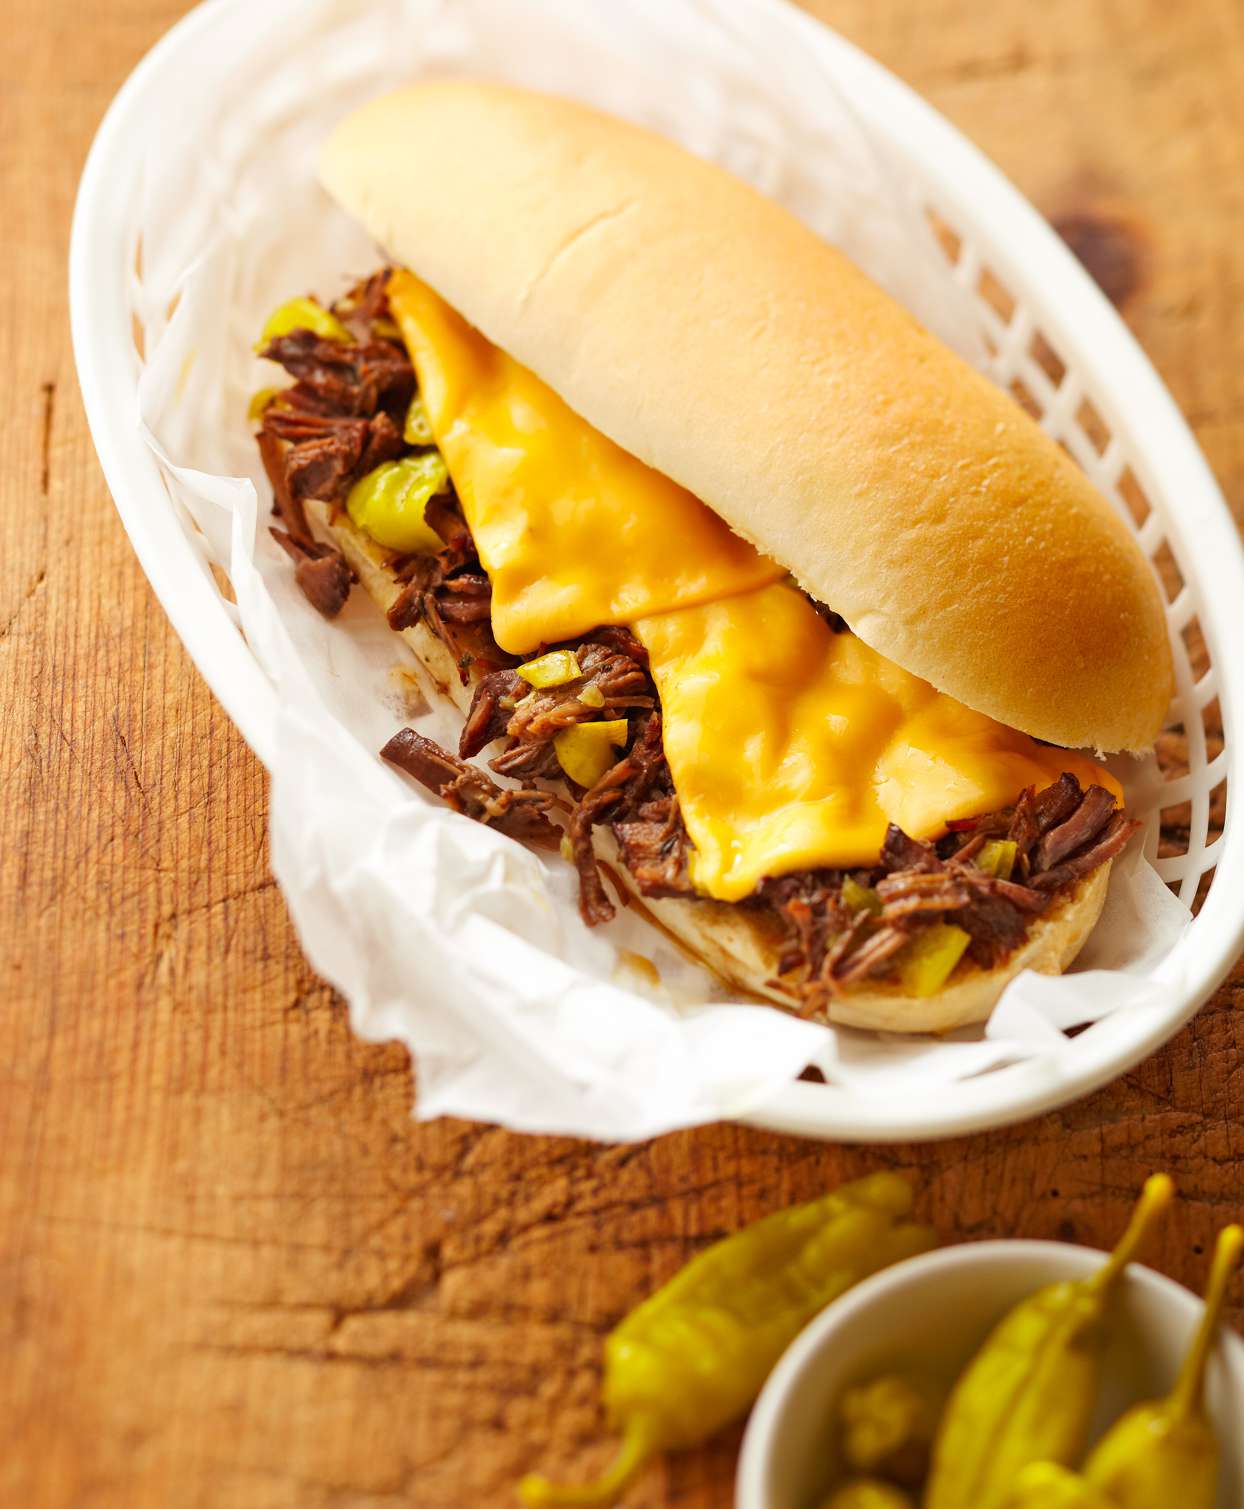 Philly Cheese Pot Roast Sandwiches